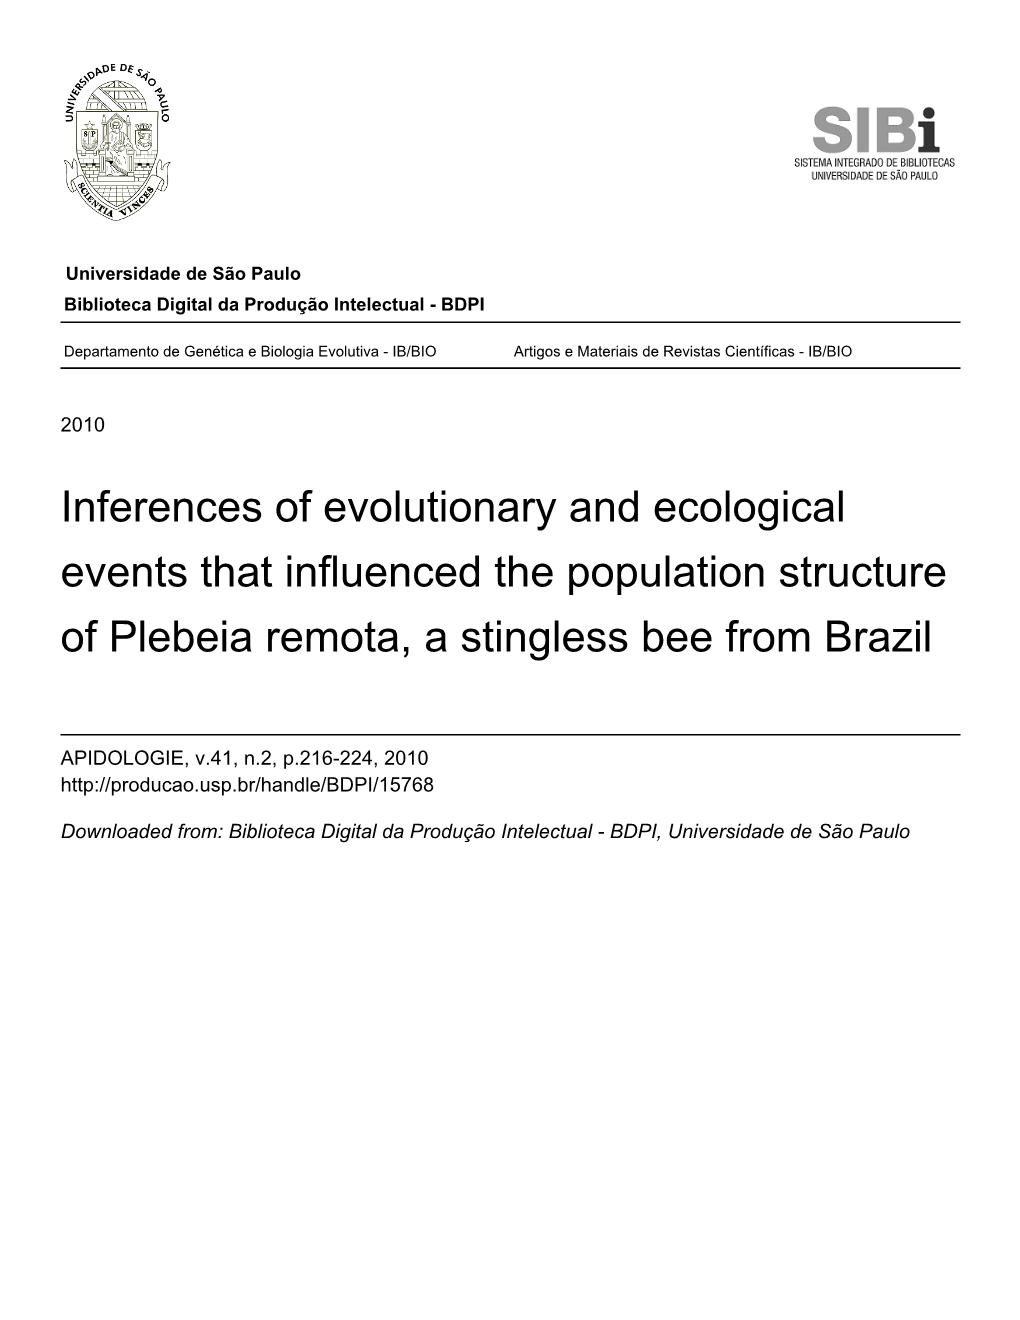 Inferences of Evolutionary and Ecological Events That Influenced the Population Structure of Plebeia Remota, a Stingless Bee from Brazil